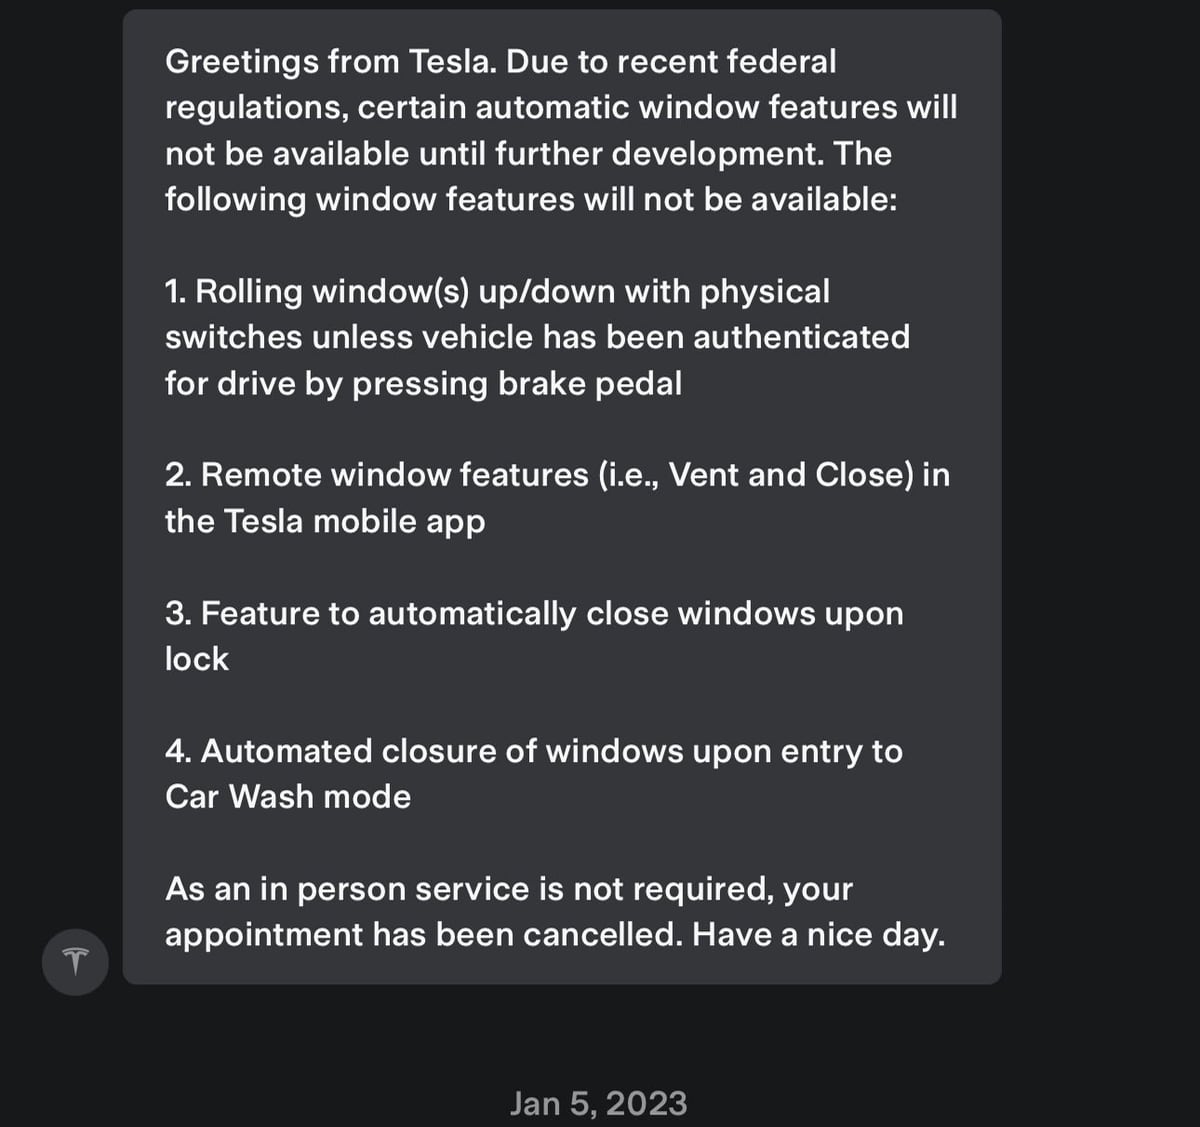 Tesla service responds to @Tommyf902 about his window auto-close feature being unavailable